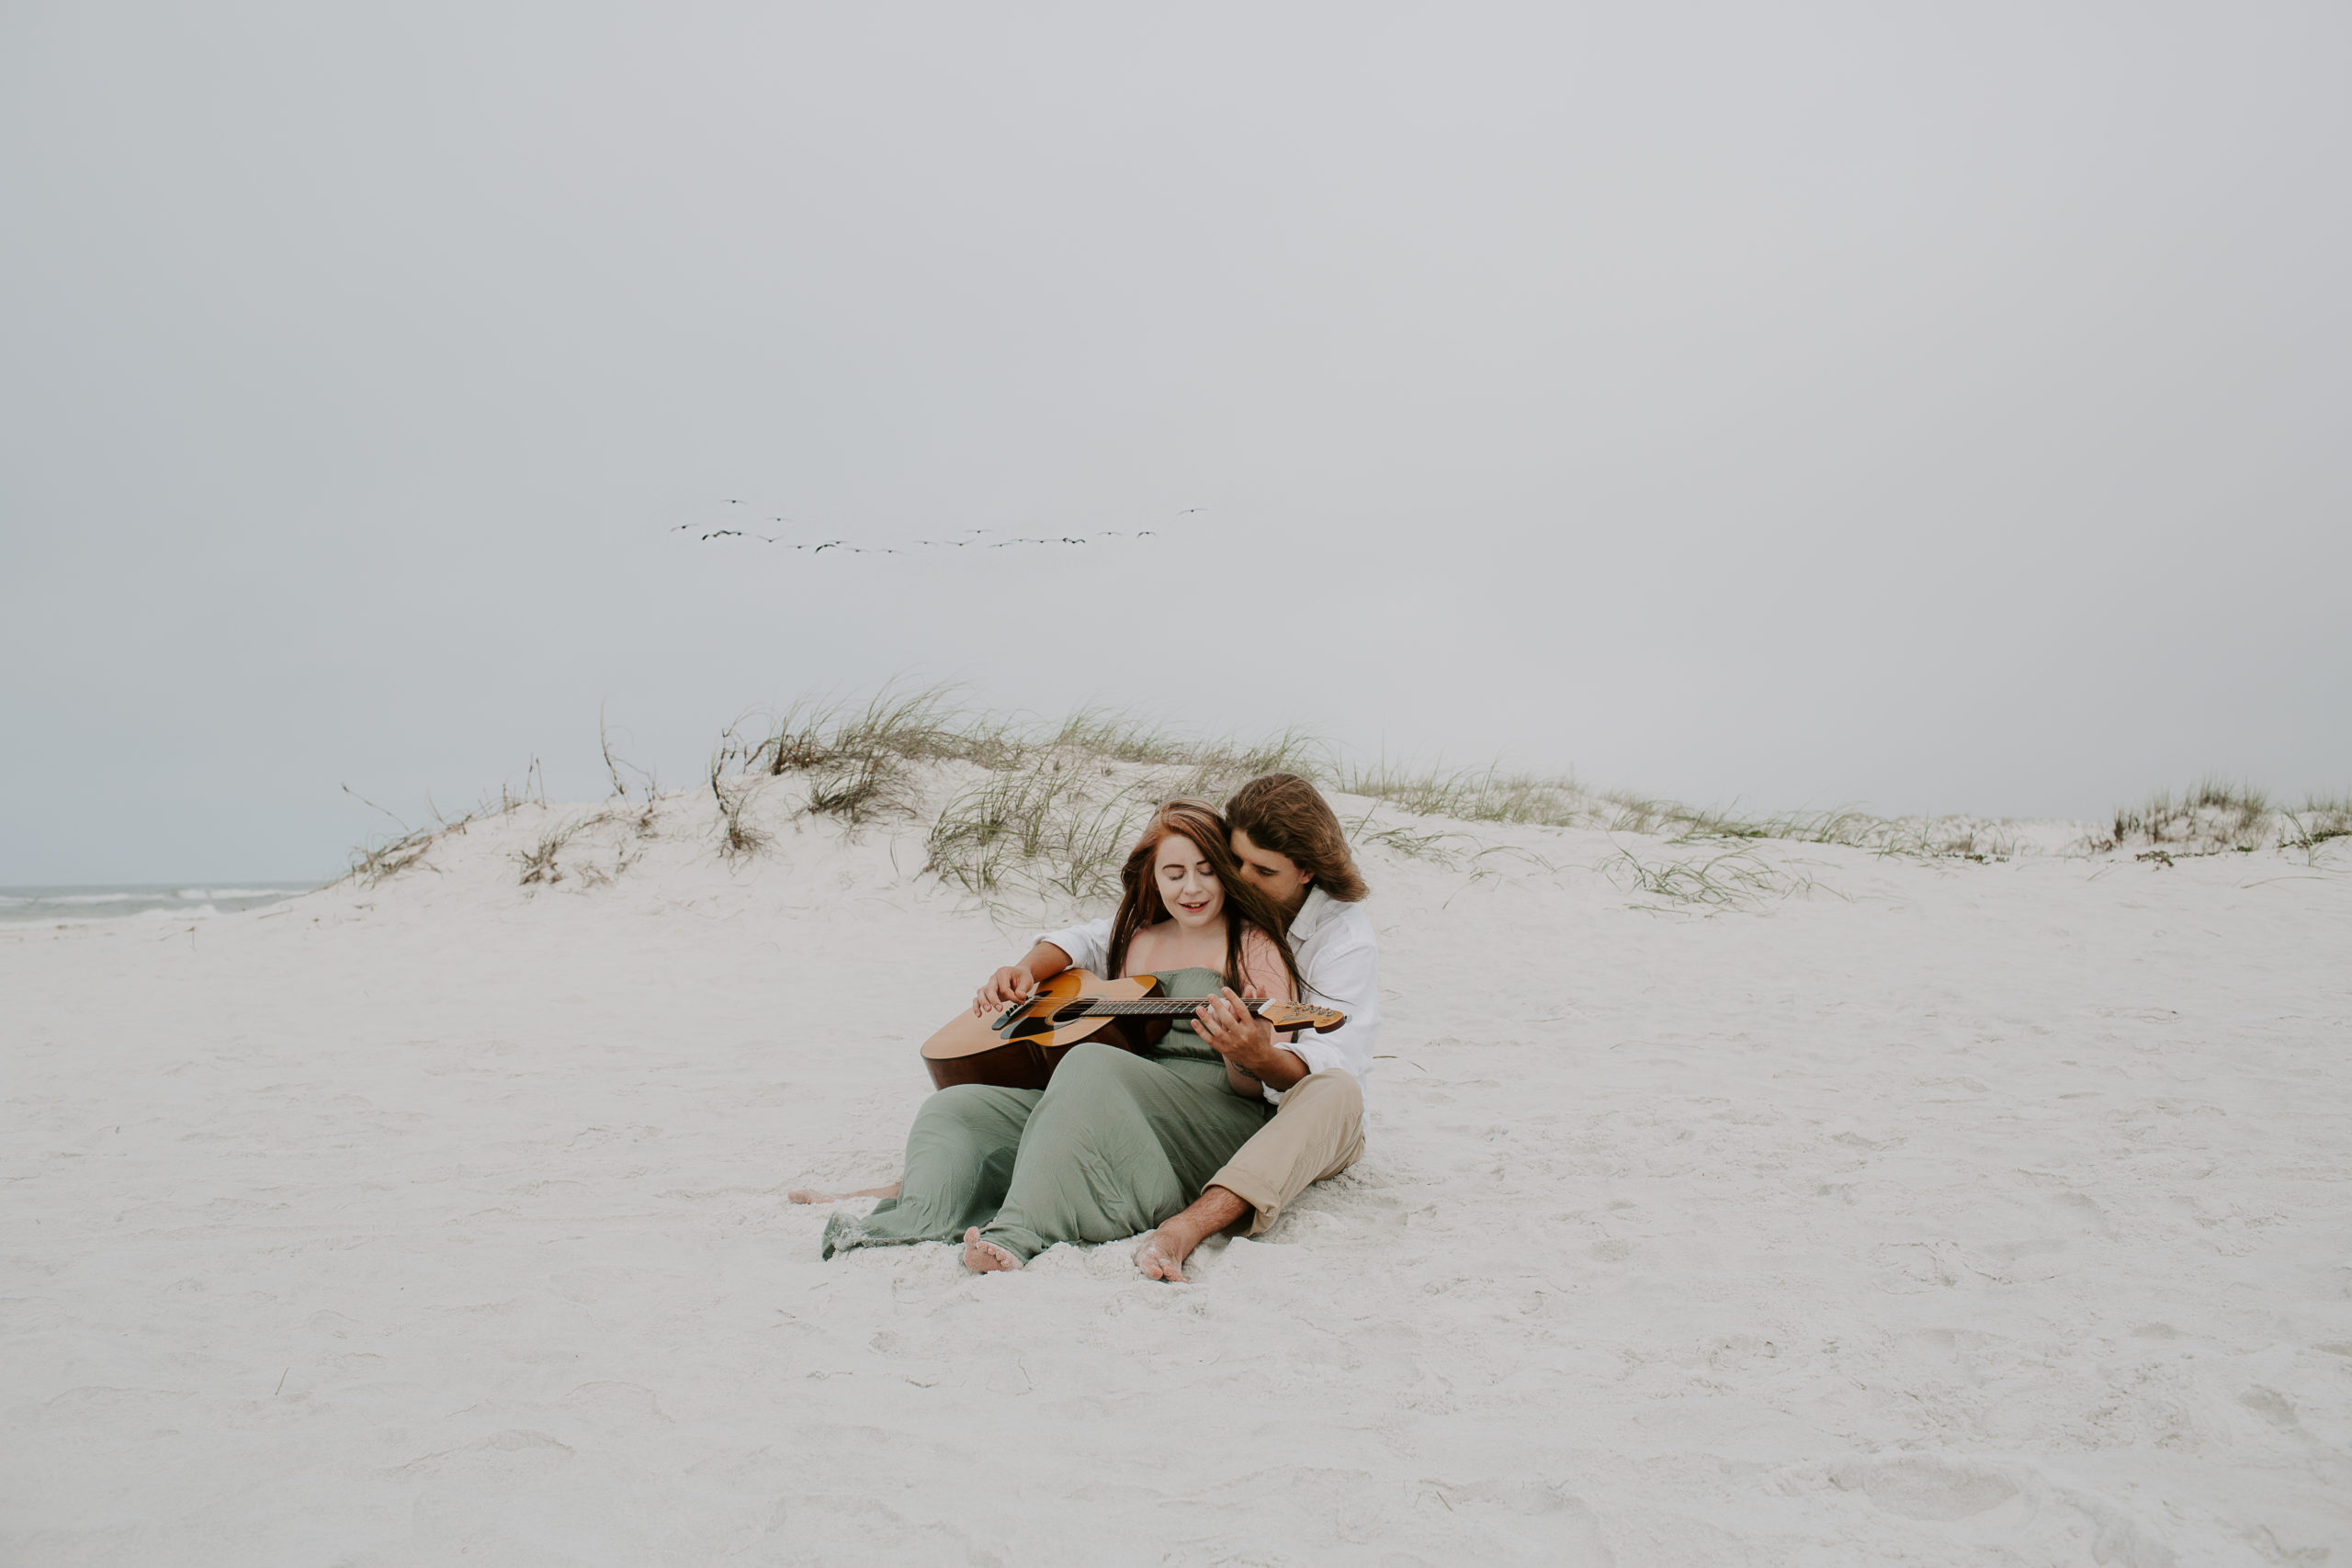 A couple sitting in the sand with the large dunes in the background playing the guitar